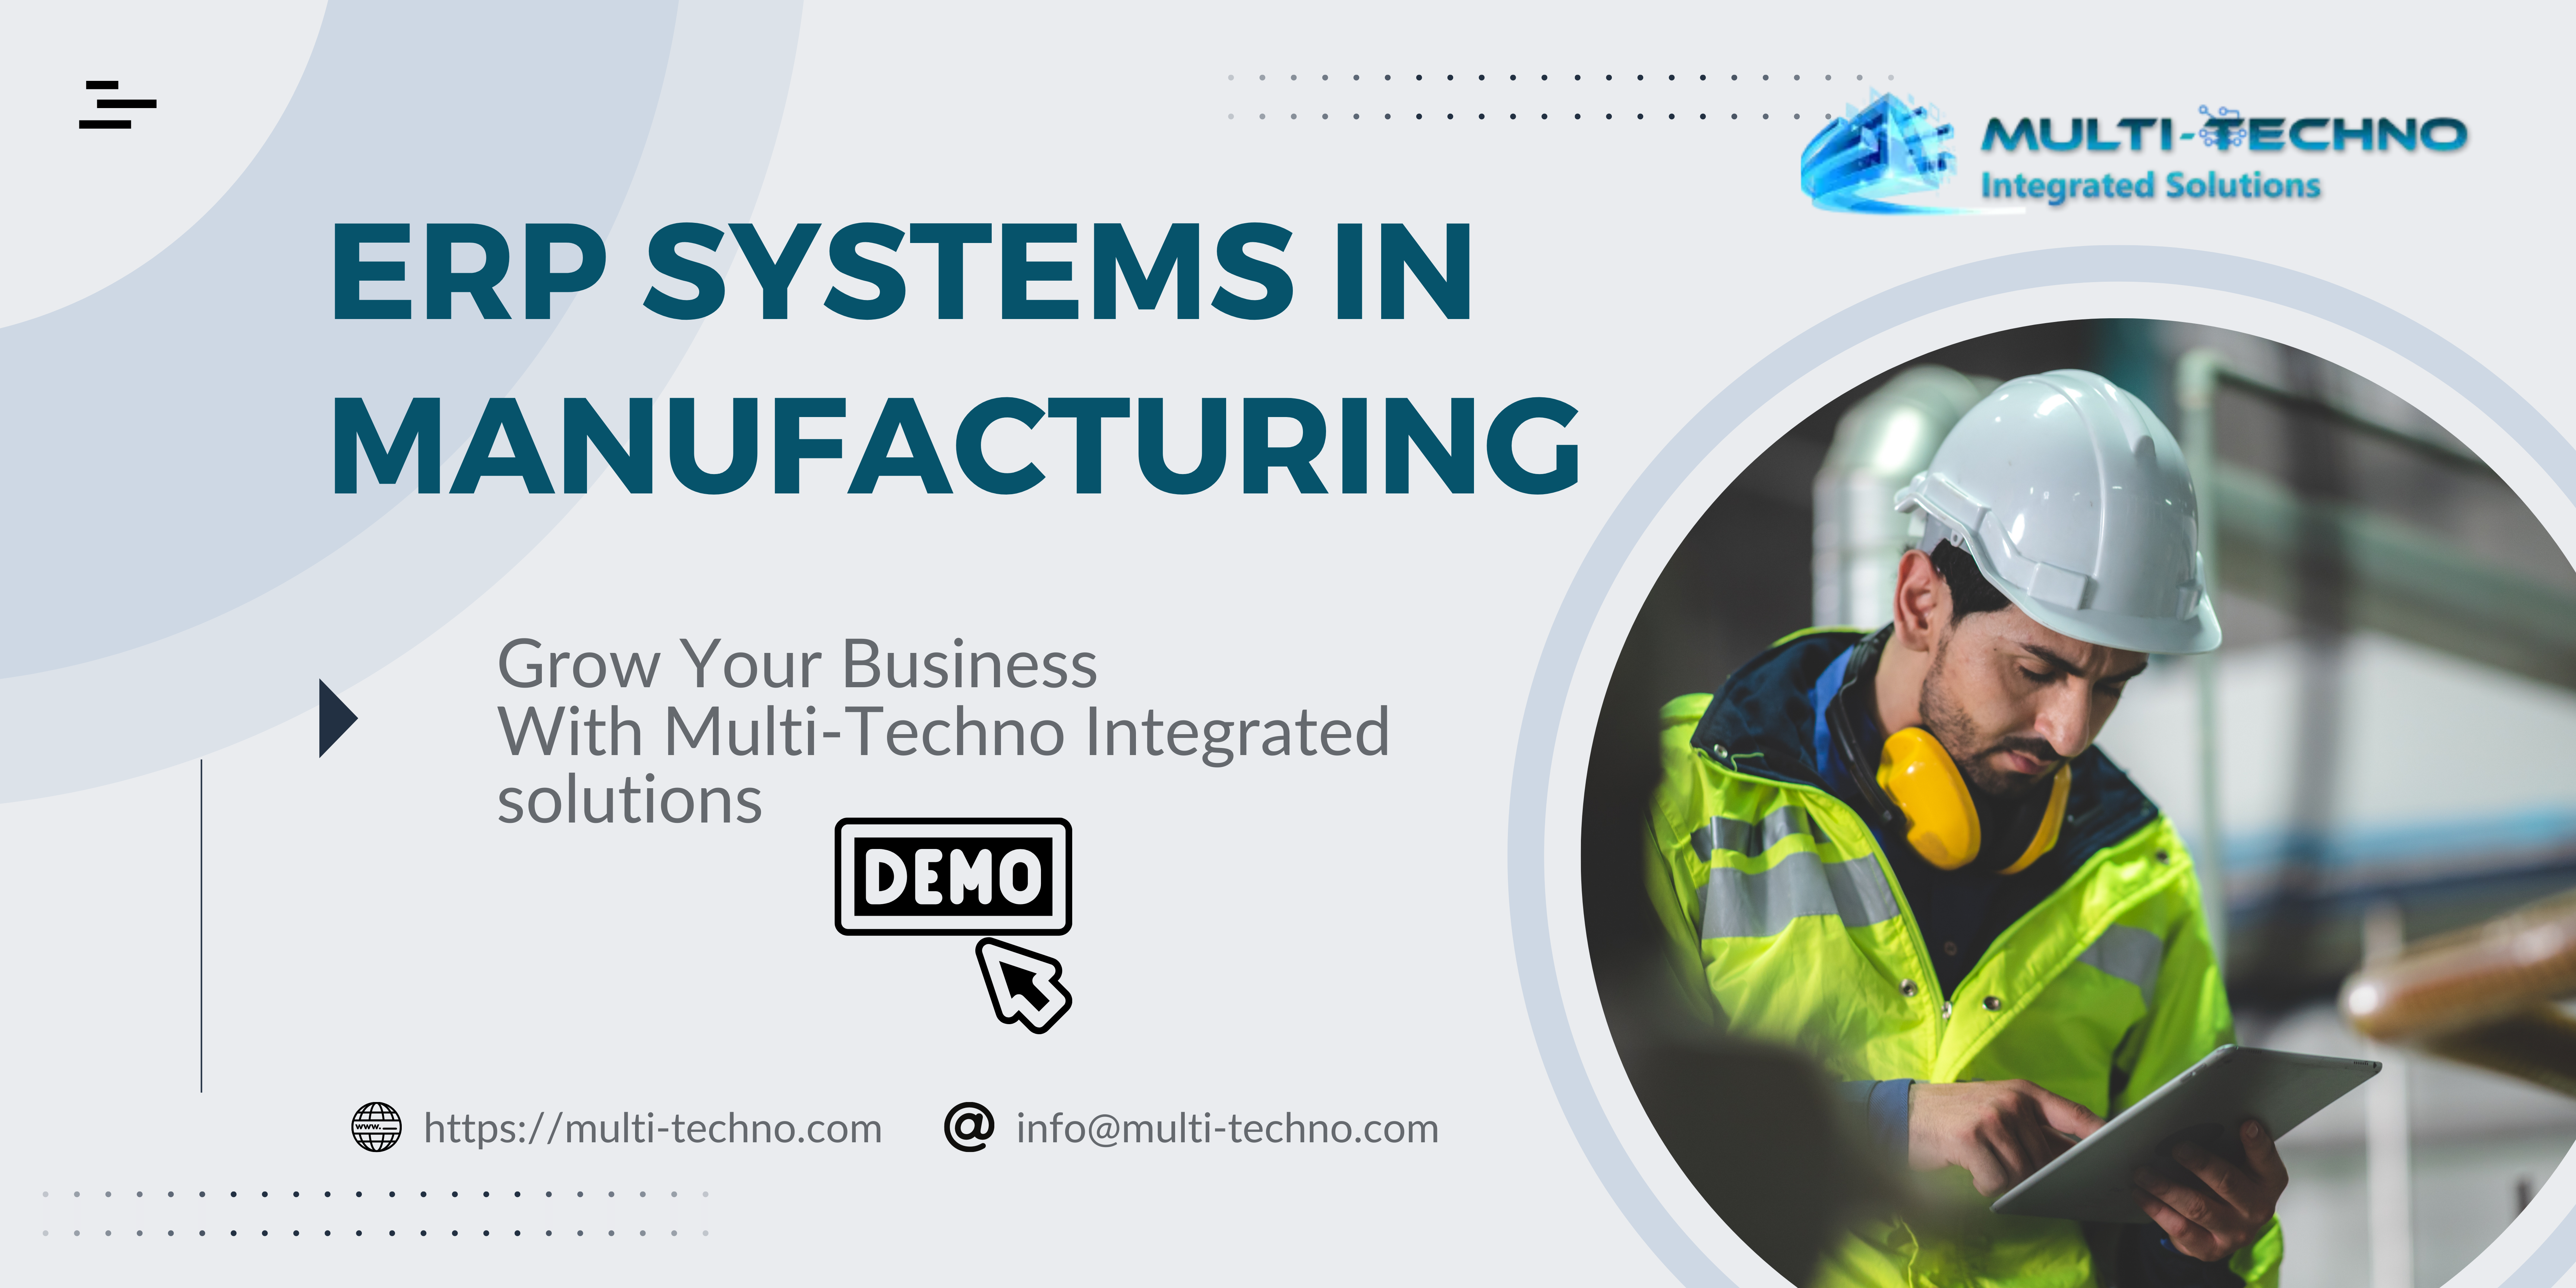 ERP systems in manufacturing - Multi-Techno